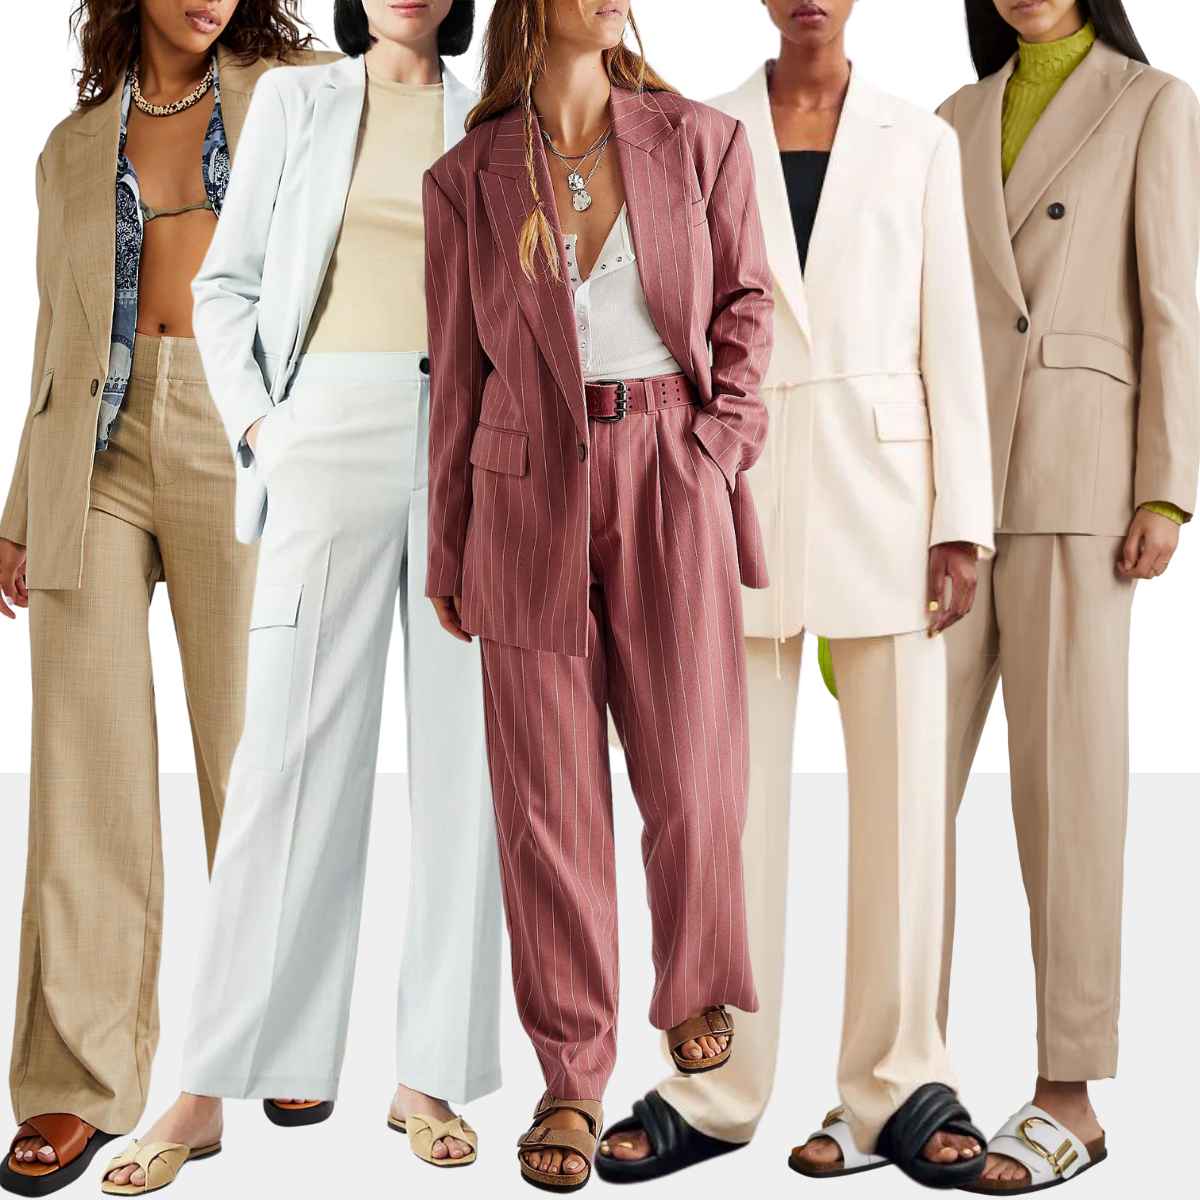 Collage of 5 women wearing various pantsuits with slide sandals.